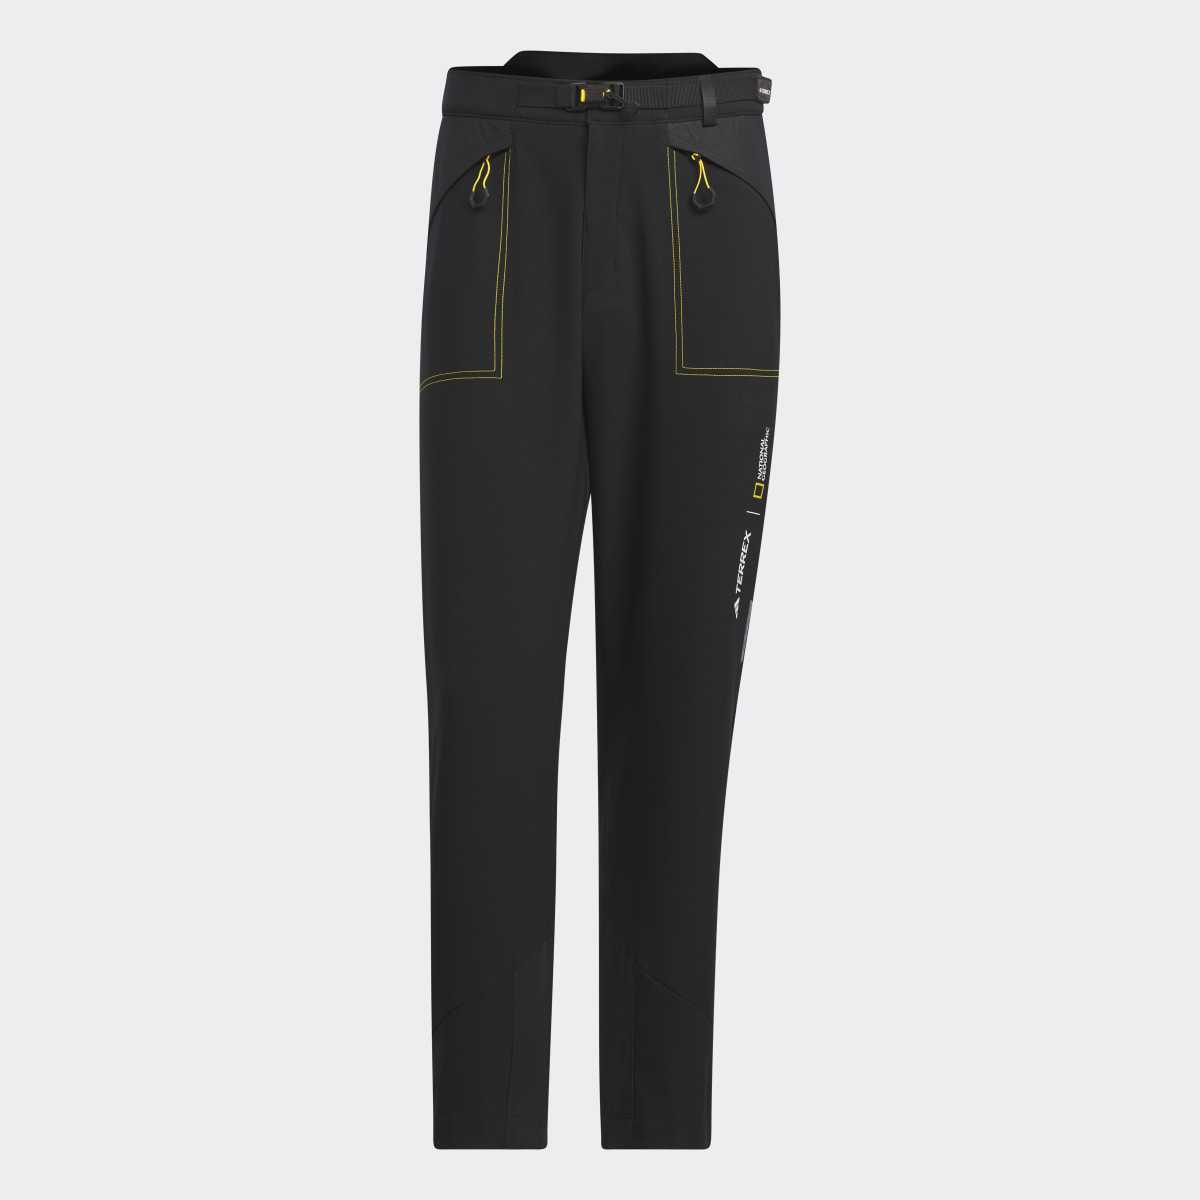 Adidas National Geographic Soft Shell Trousers. 4